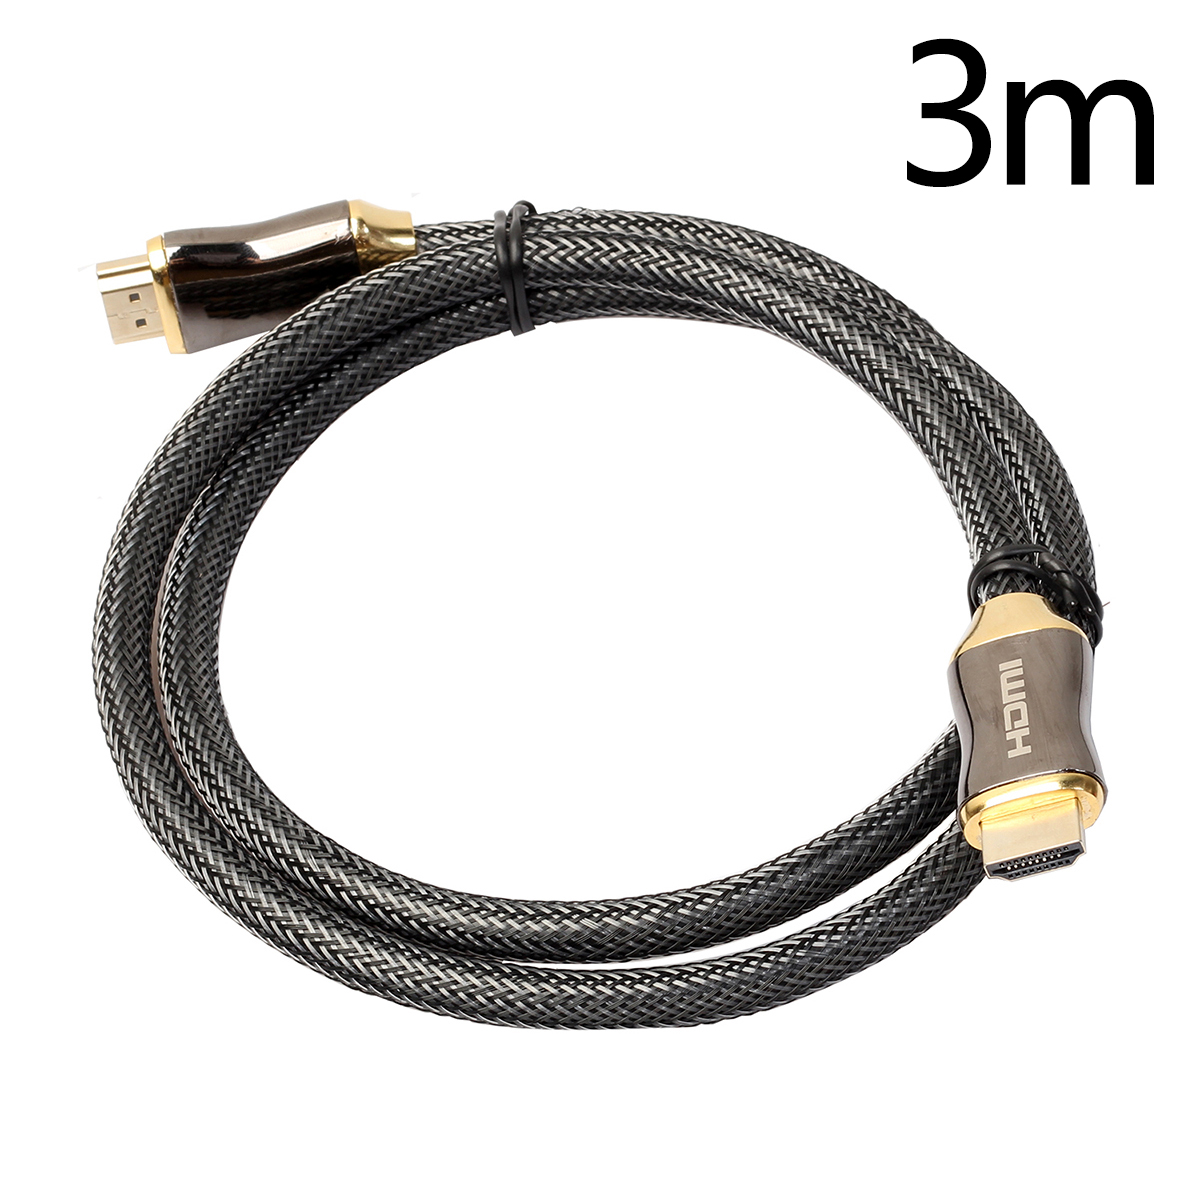 Braided Ultra HD HDMI Cable v2.0 High Speed Ethernet HDTV Cable 3M - Black